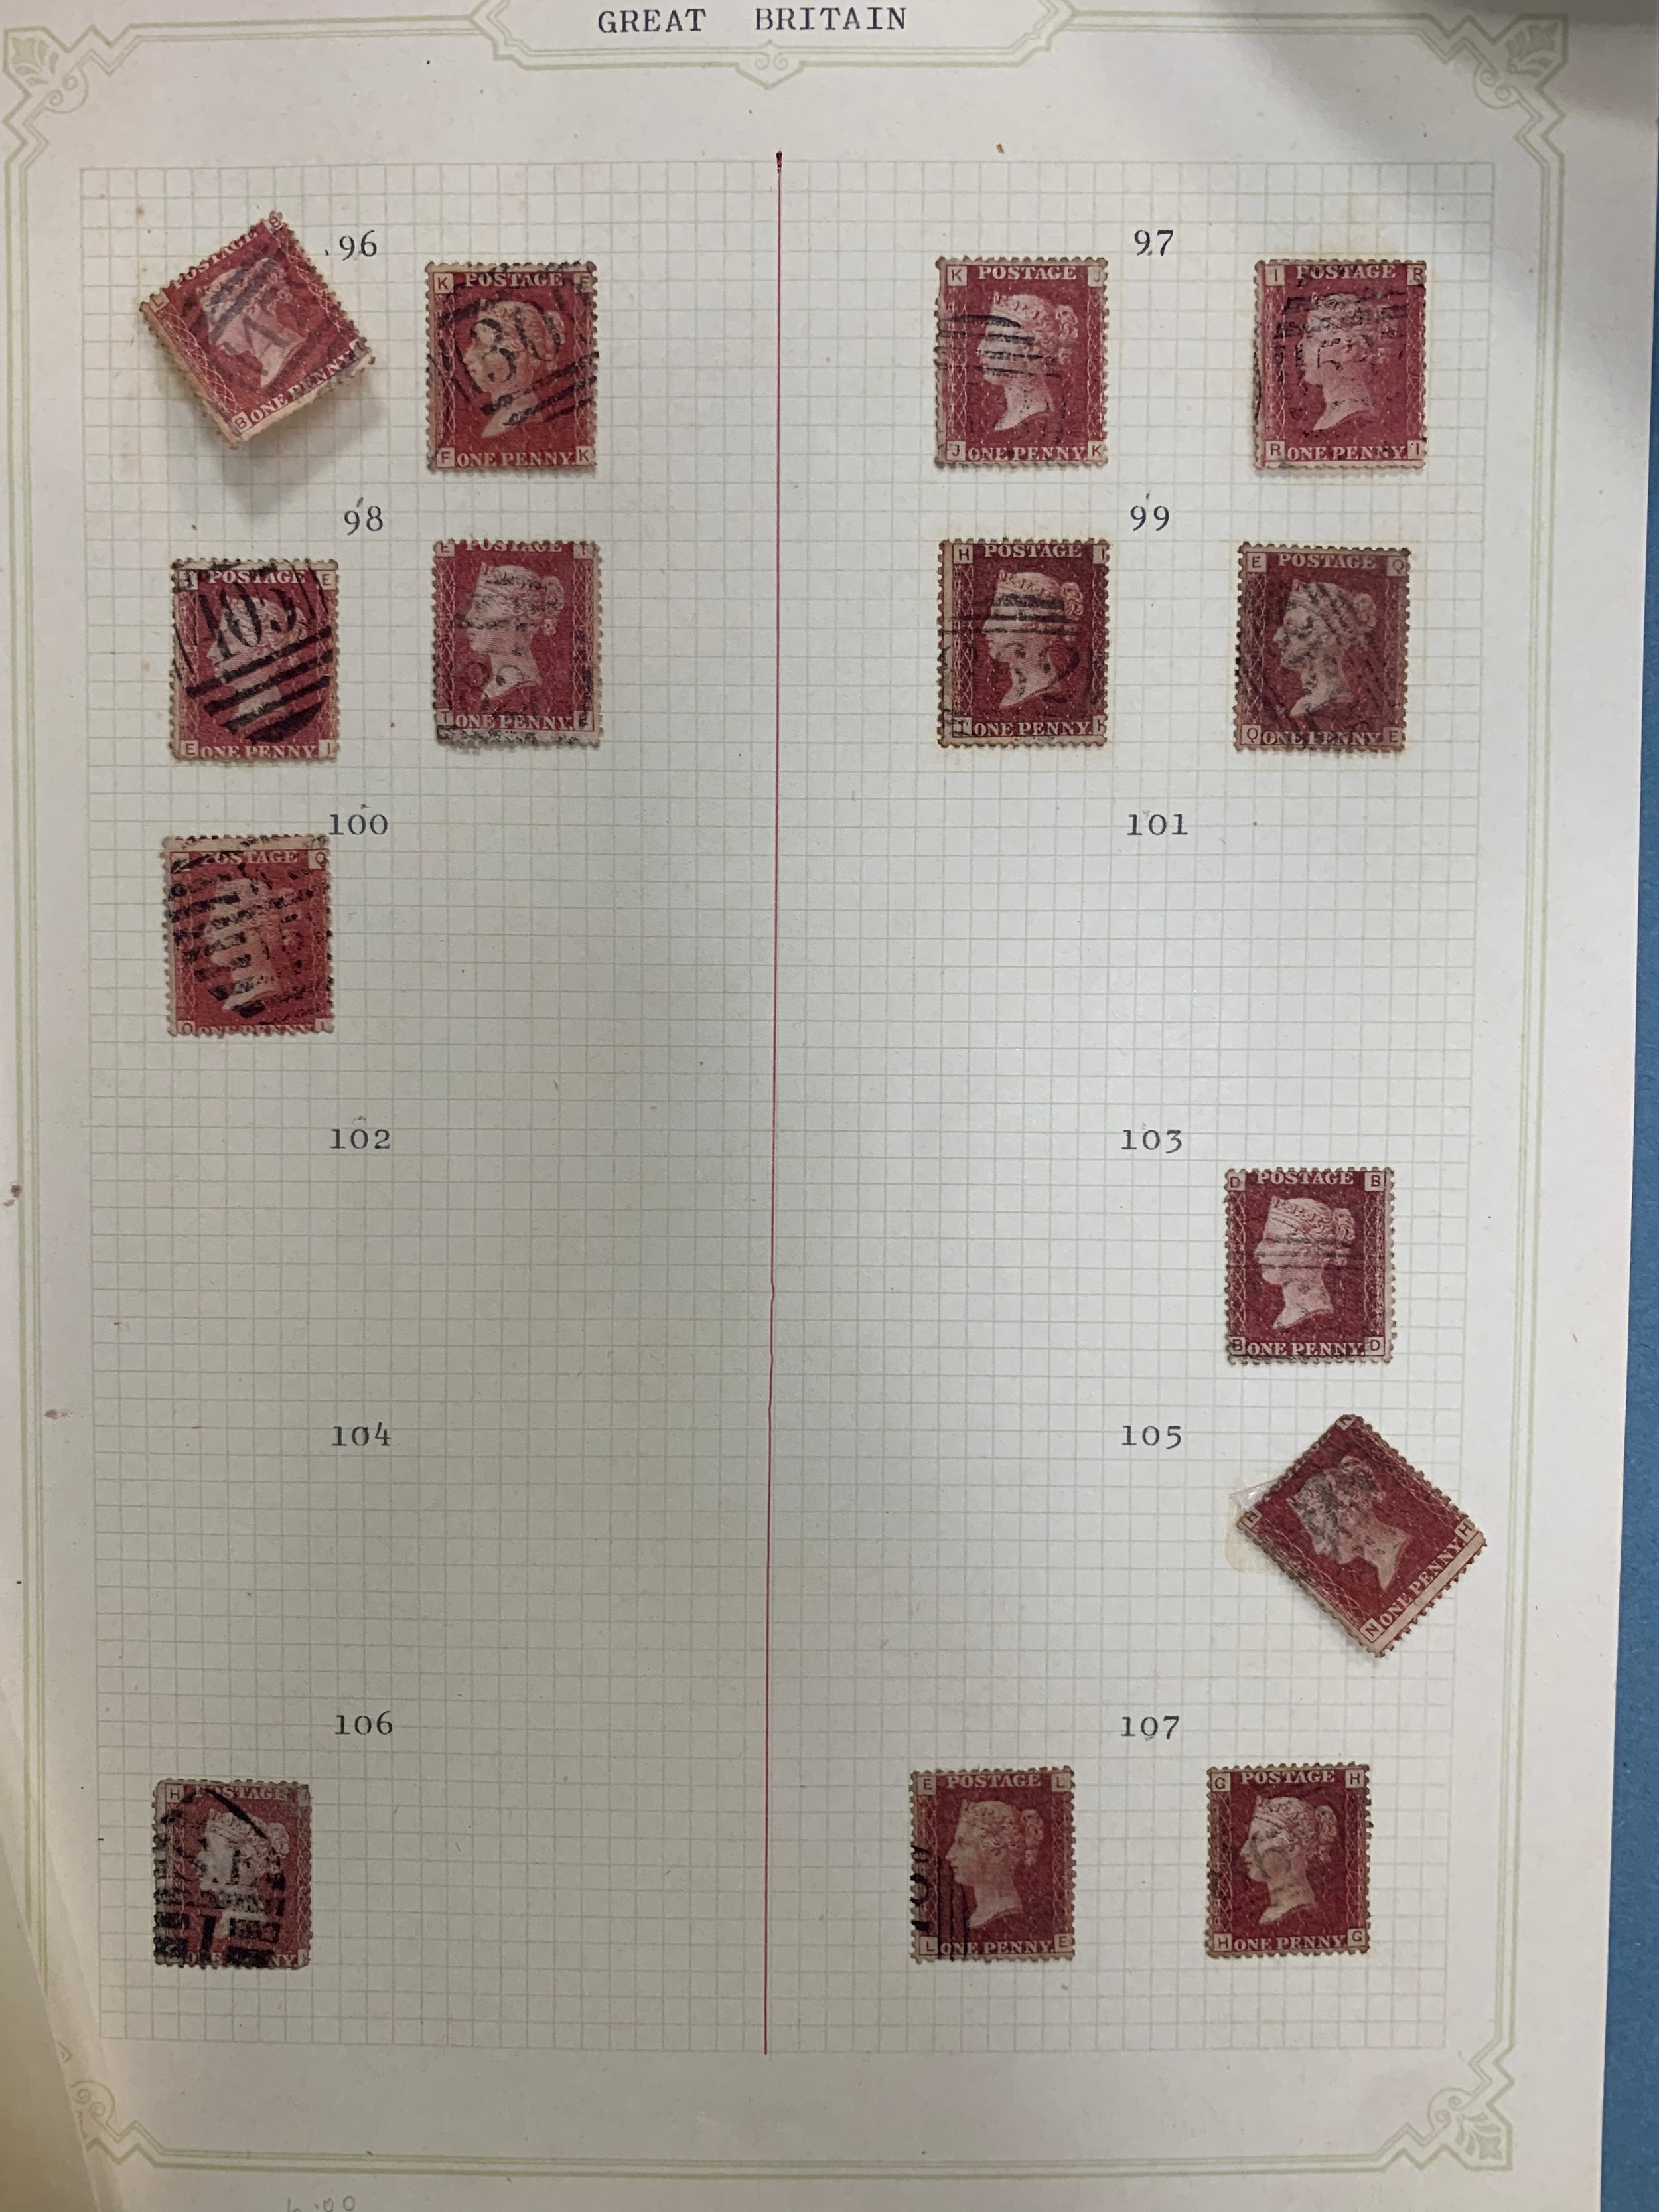 Great Britain, 1858-64 annotated and well-laid out collection of 1d Penny Reds FU from plate 73 to - Image 12 of 12